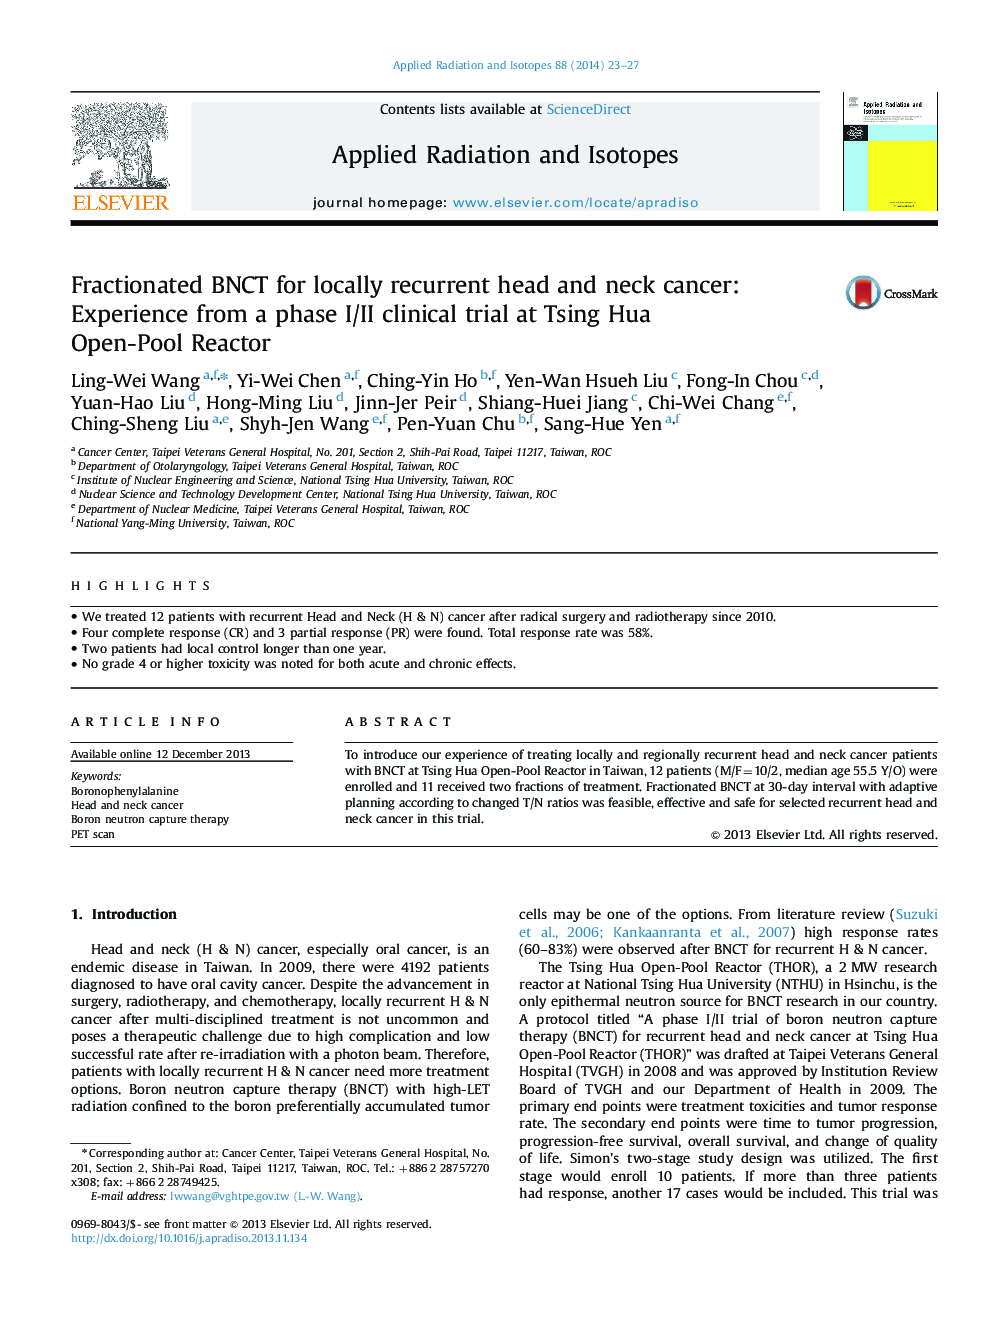 Fractionated BNCT for locally recurrent head and neck cancer: Experience from a phase I/II clinical trial at Tsing Hua Open-Pool Reactor